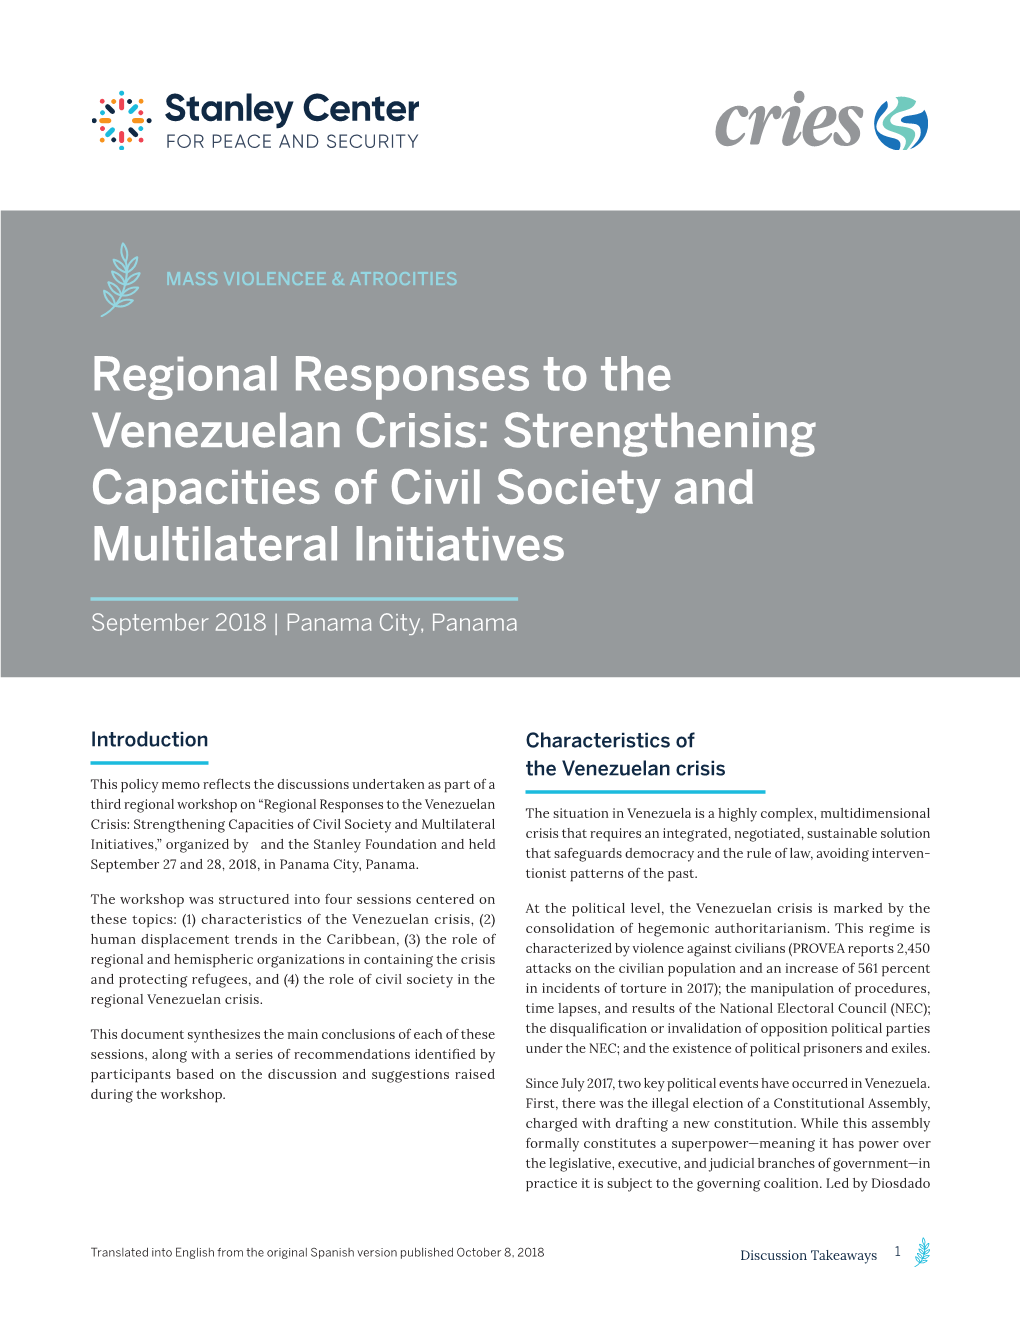 Regional Responses to the Venezuelan Crisis: Strengthening Capacities of Civil Society and Multilateral Initiatives